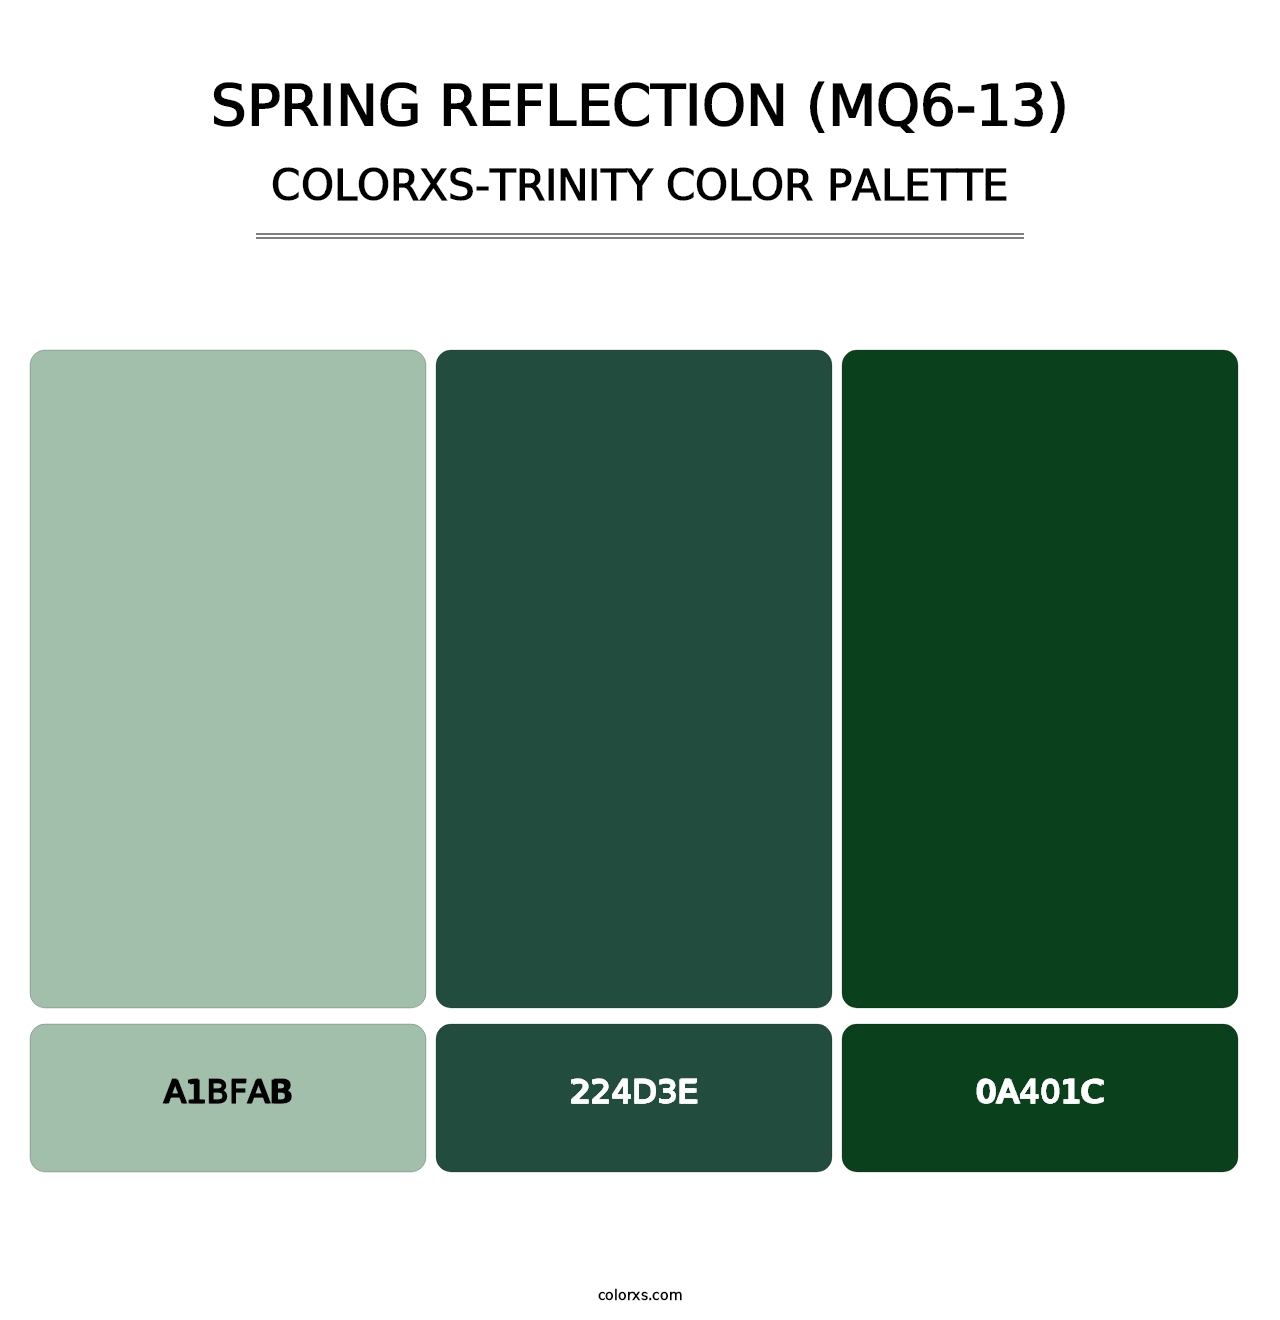 Spring Reflection (MQ6-13) - Colorxs Trinity Palette